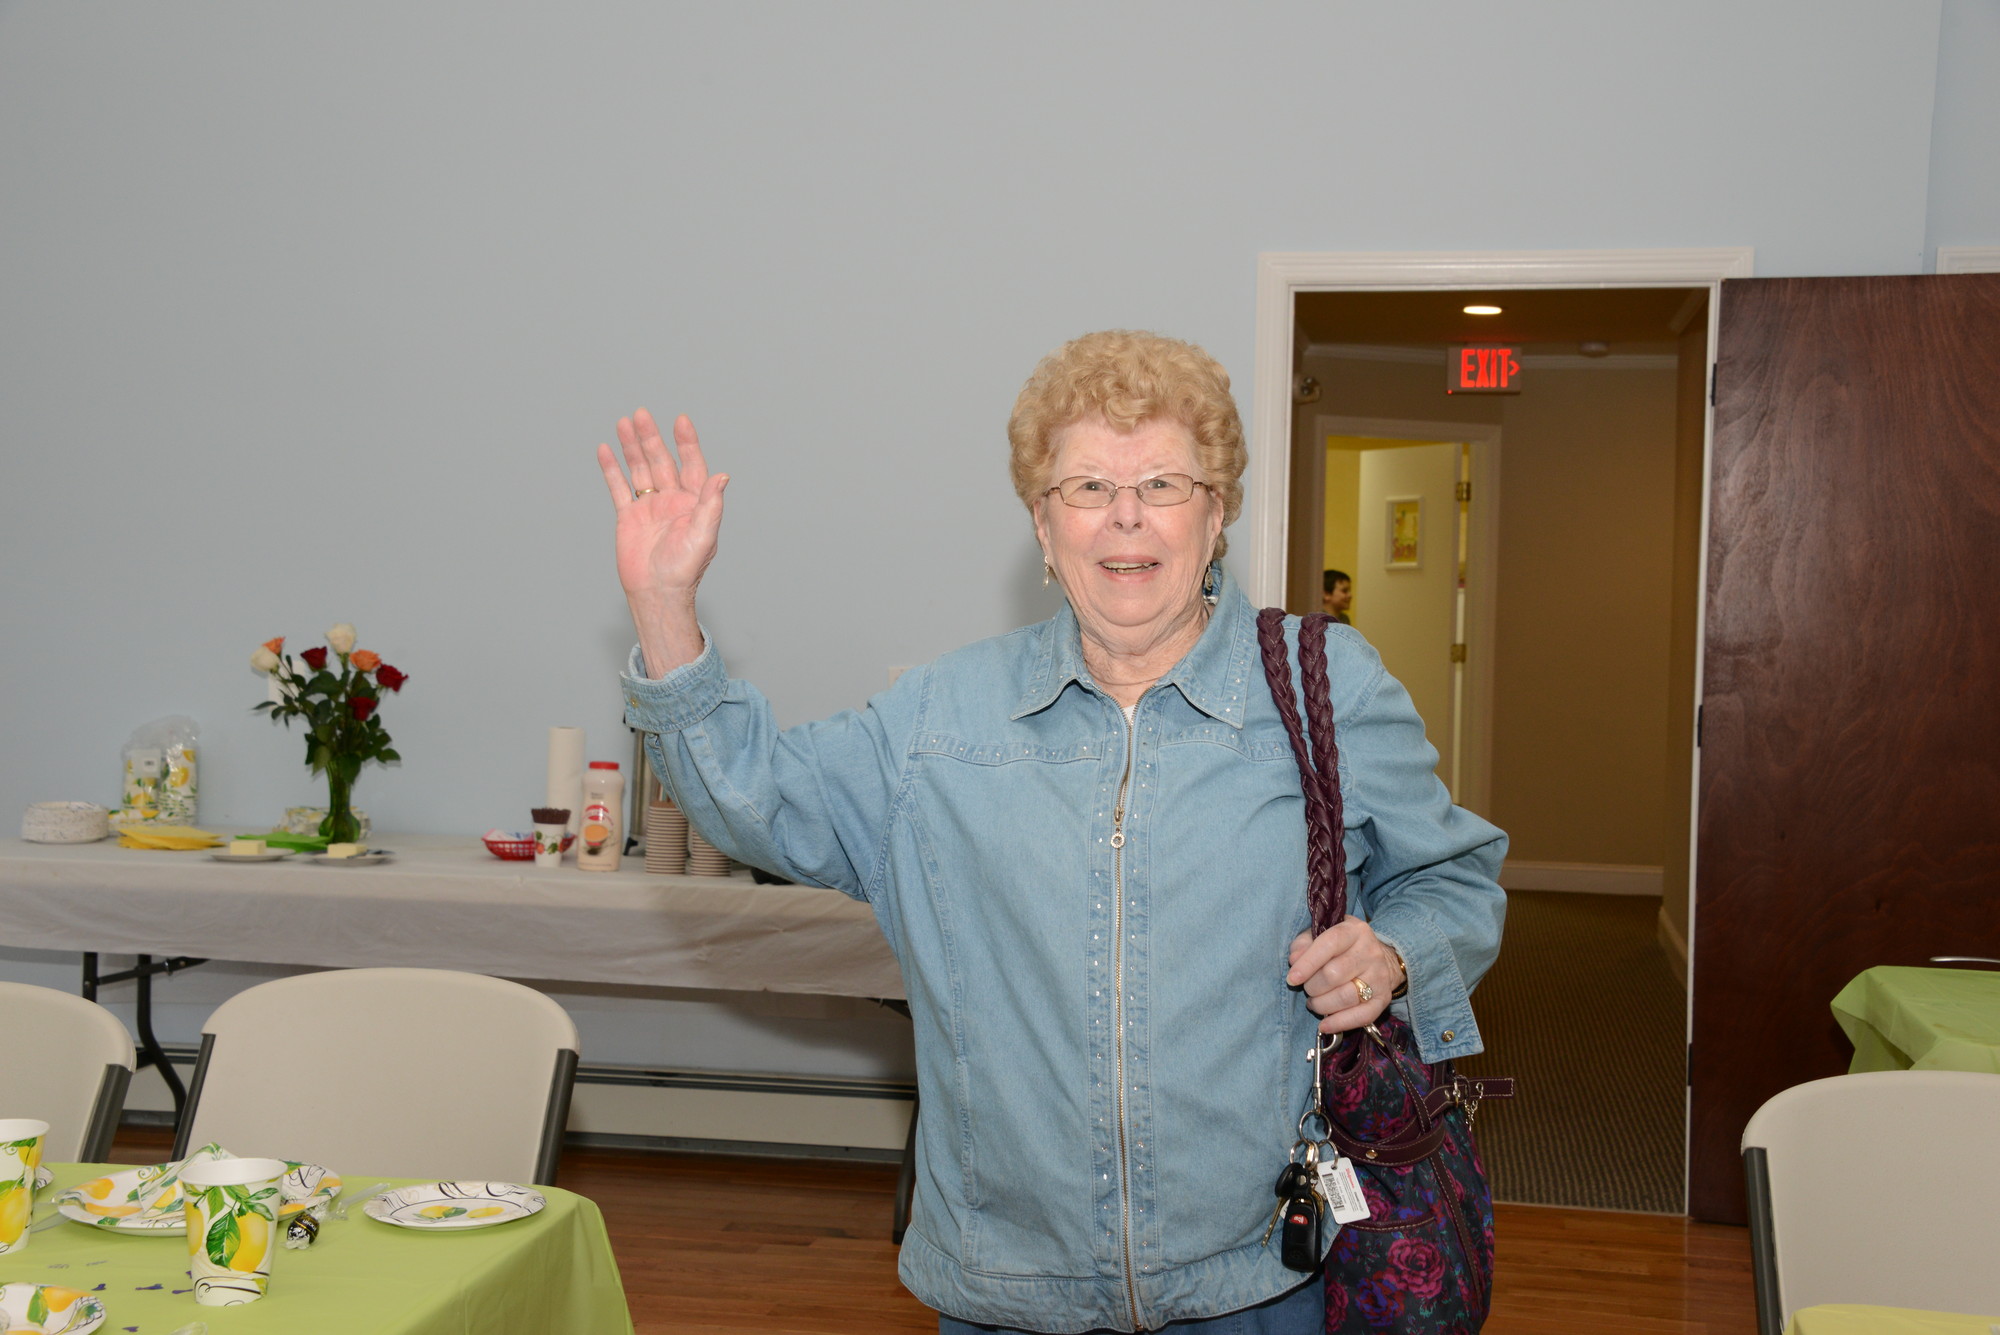 Ann Ely greeted everyone with a warm hello.